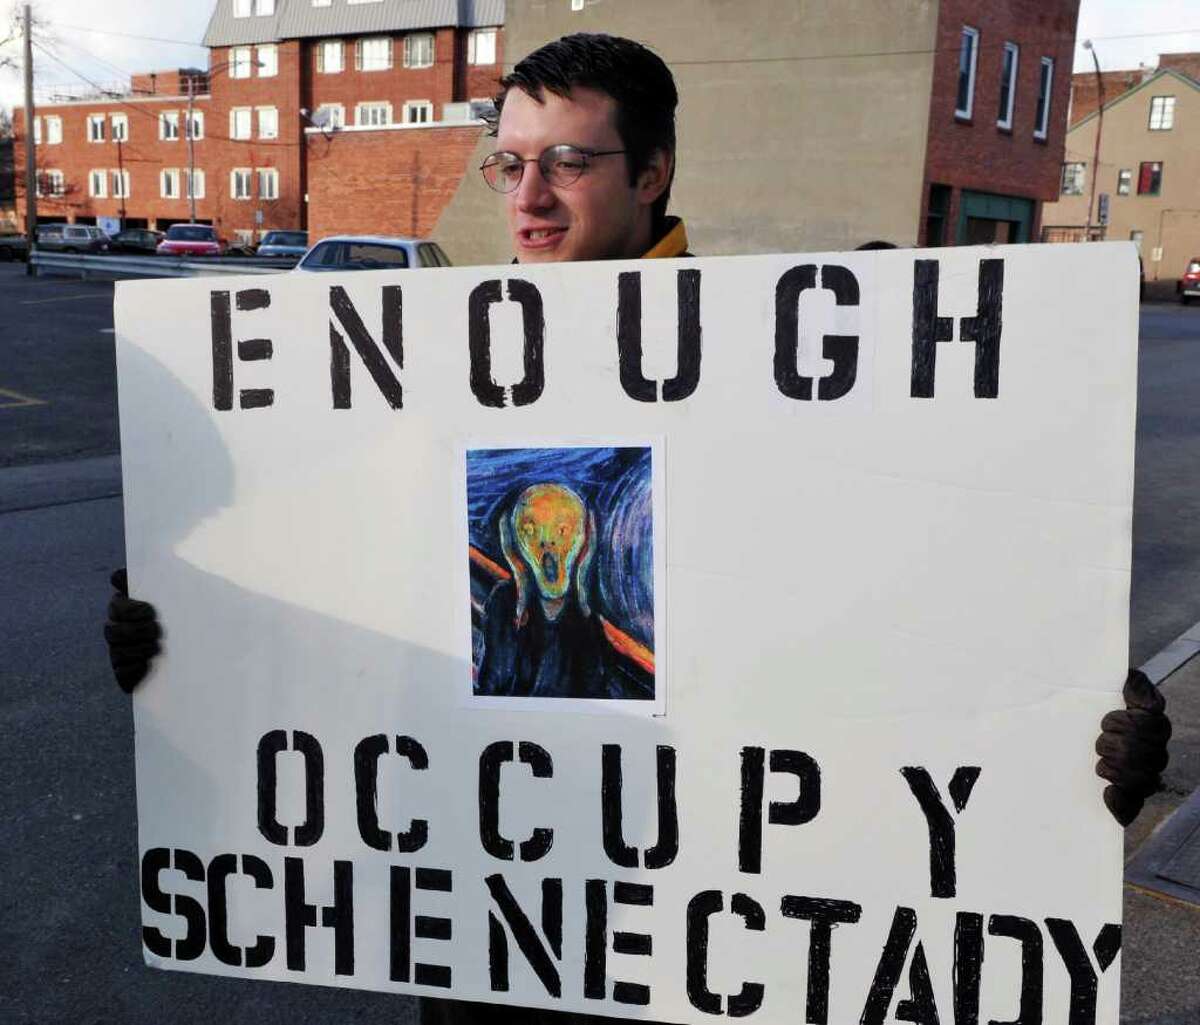 Schenectady High School student Anthony Hadden, 19, carries a sign during Occupy Schenectady's "March on General Electric " in Schenectady Saturday Dc. 10, 2011. (John Carl D'Annibale / Times Union)